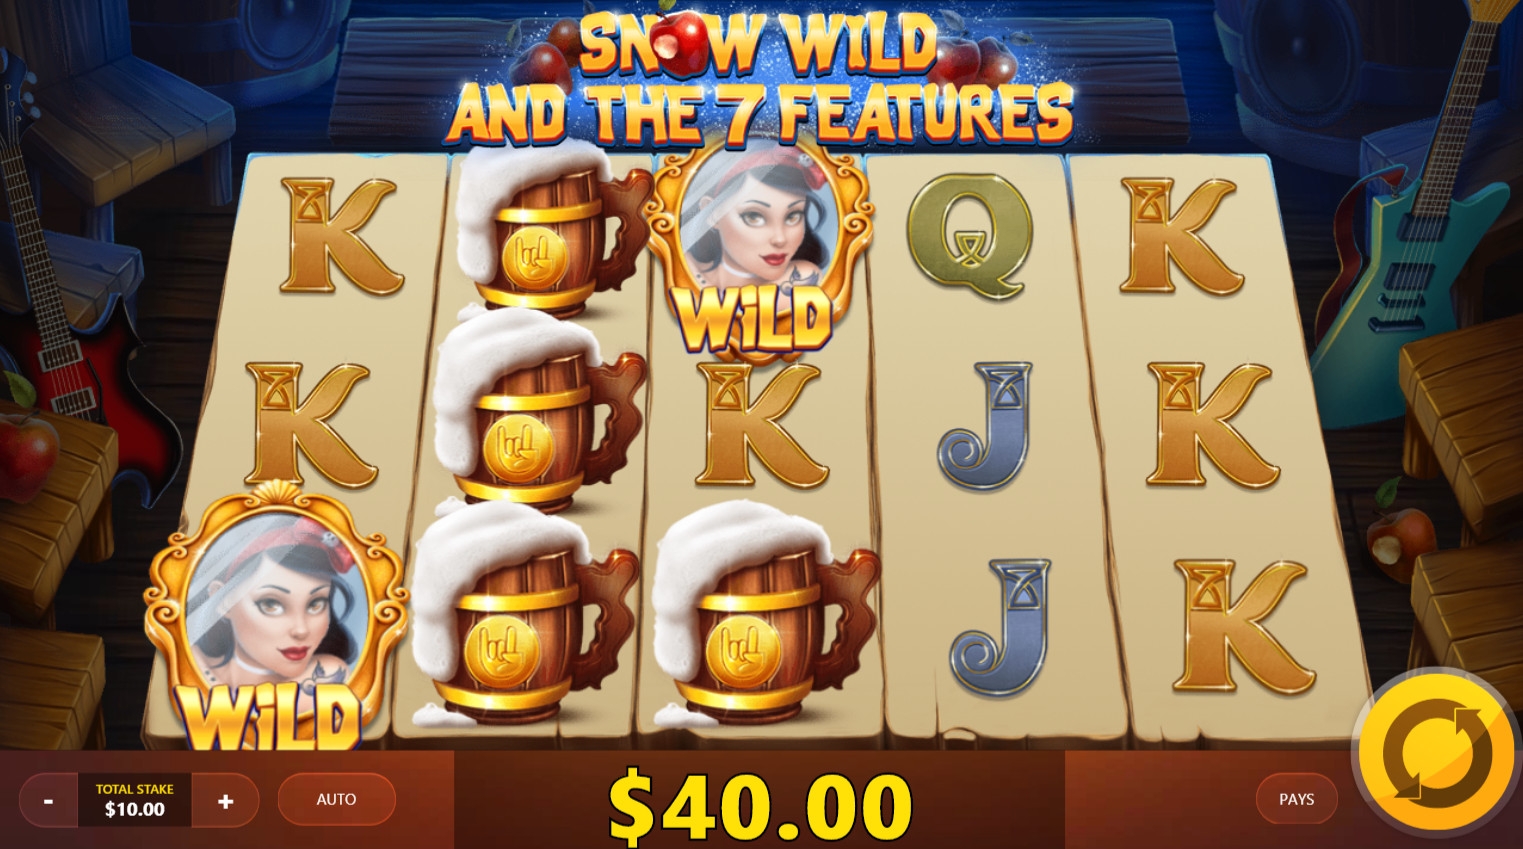 Snow Wild and the 7 Features (Snow Wild and the 7 Features) from category Slots